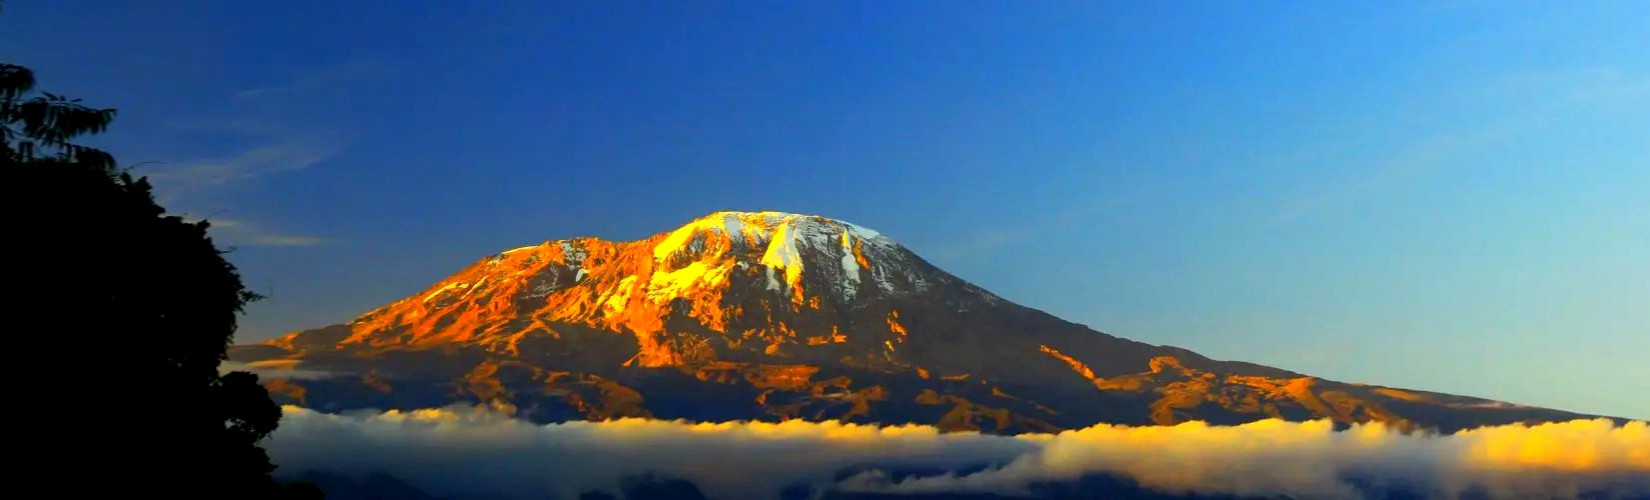 A Complete Guide to Climbing Mount Kilimanjaro